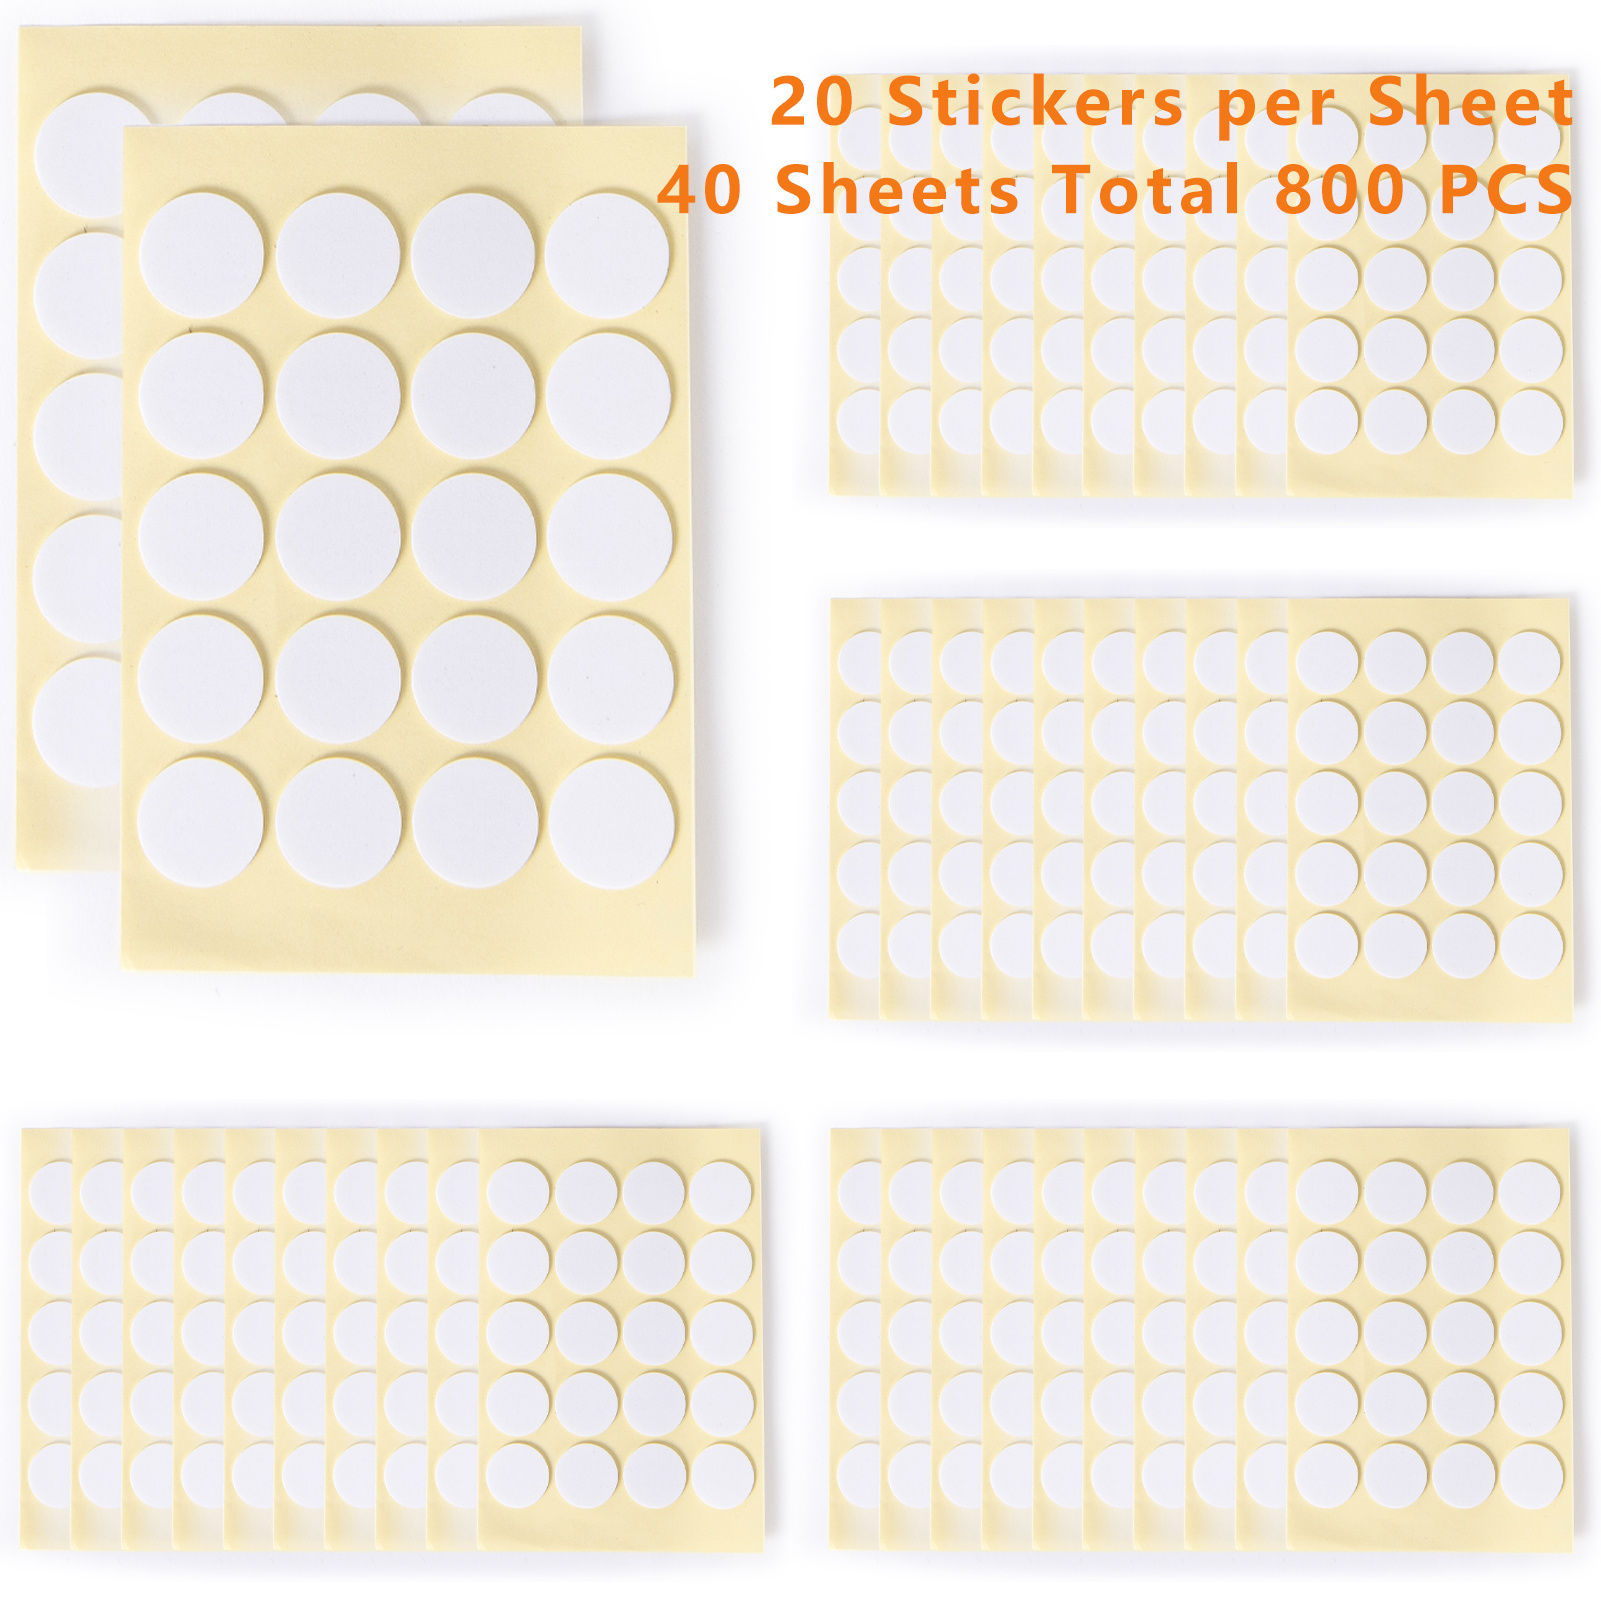 400Pcs Candle Wick Stickers, Adhere Steady in Hot Heatproof Wax